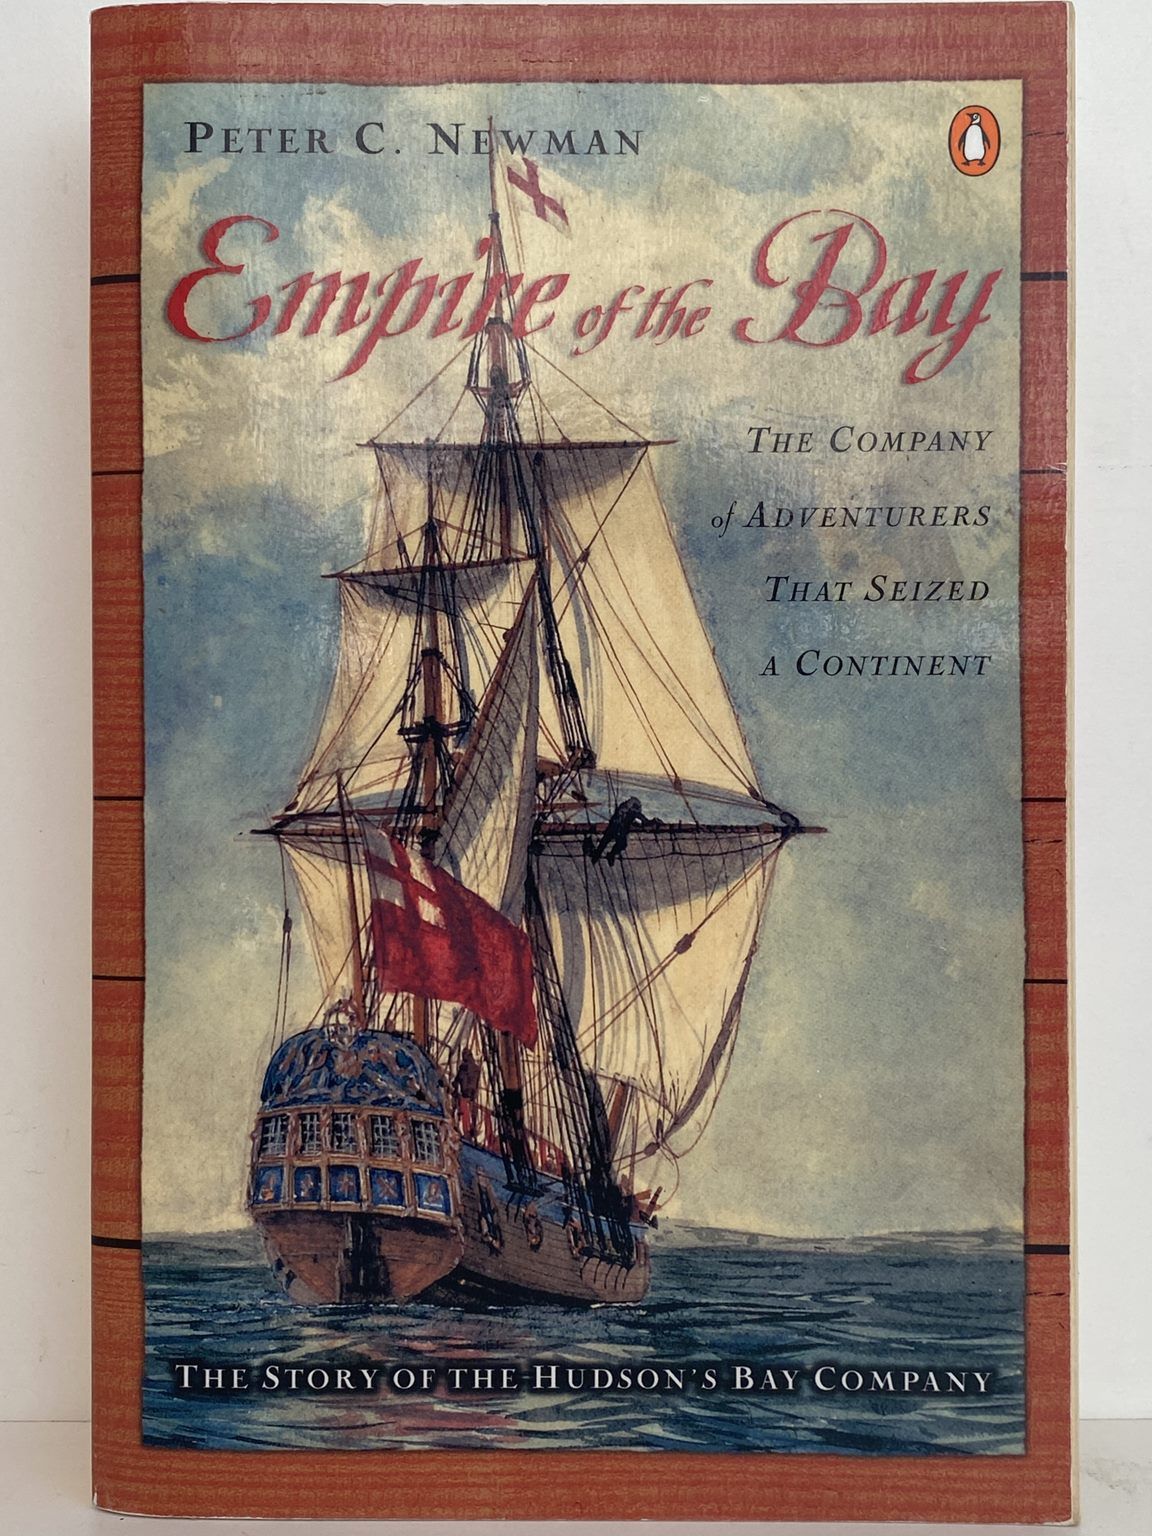 EMPIRE of the BAY: The Story of the Hudson Bays Company